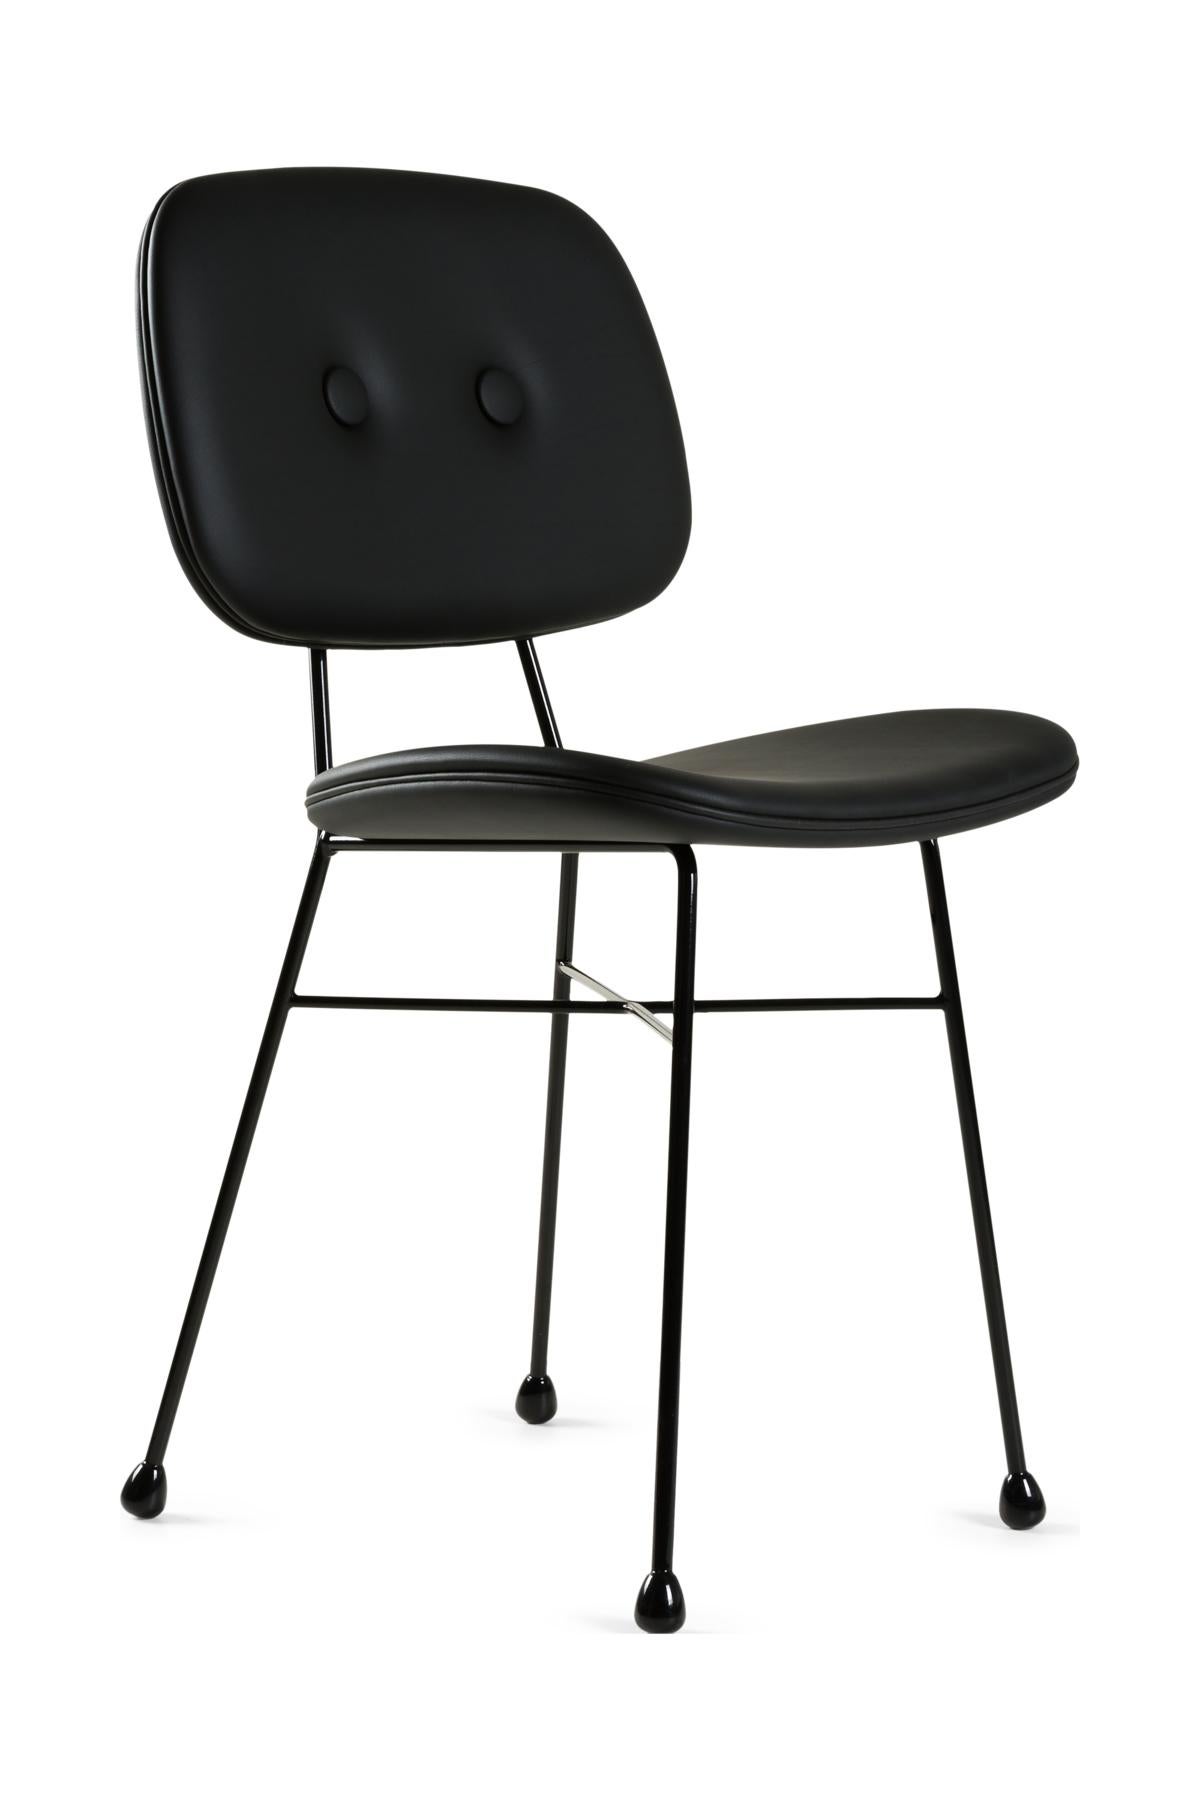 Moooi The Golden Chair in Black Steel Frame with Black Upholstery For Sale 1